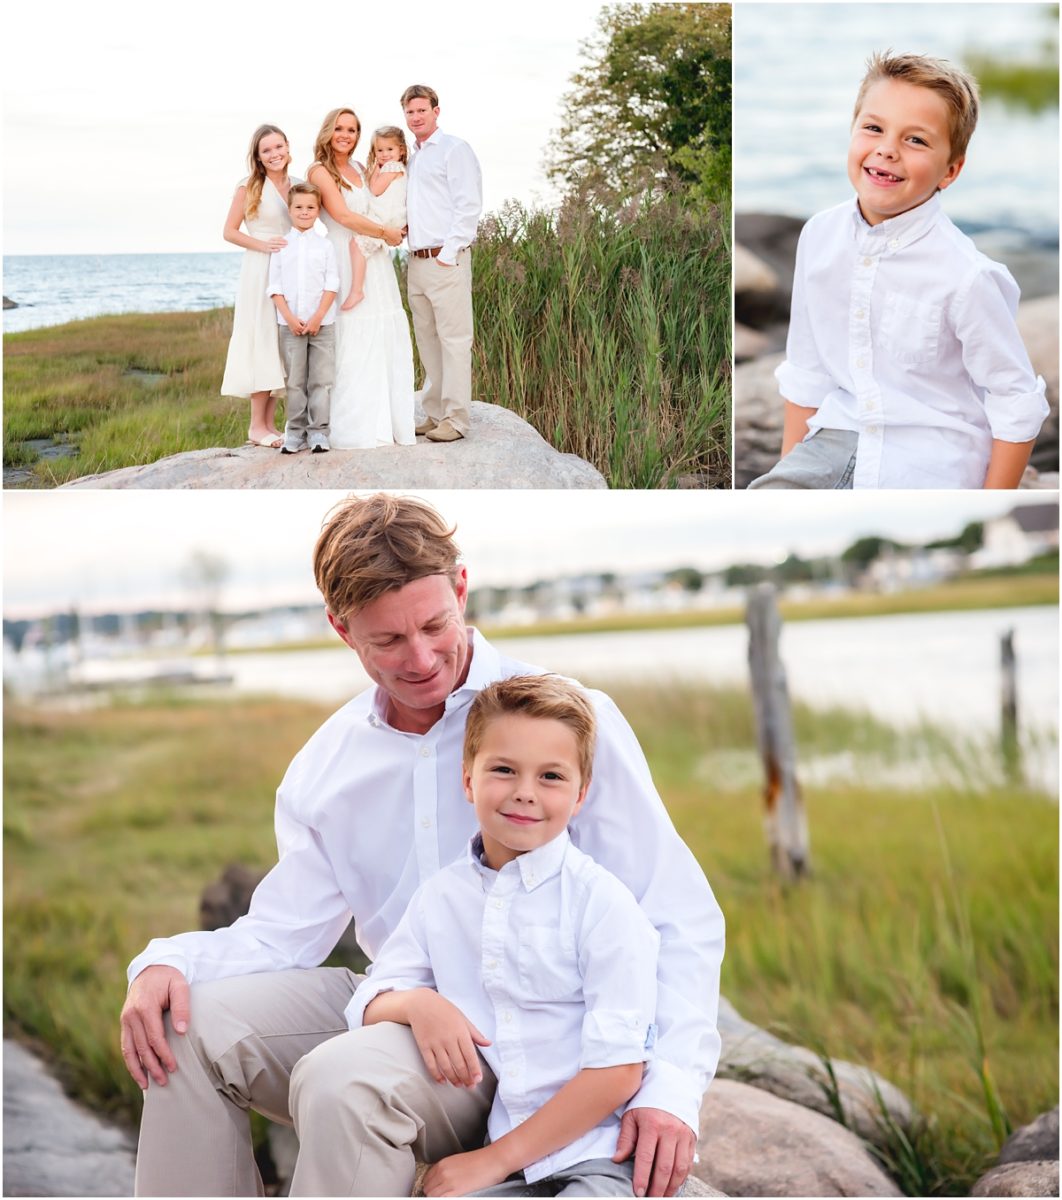 Best Family Photographers in CT | Natural CT Family Photography | CT Family Photographer | Outdoor Family Photography | CT Photography | www.kellidease.com